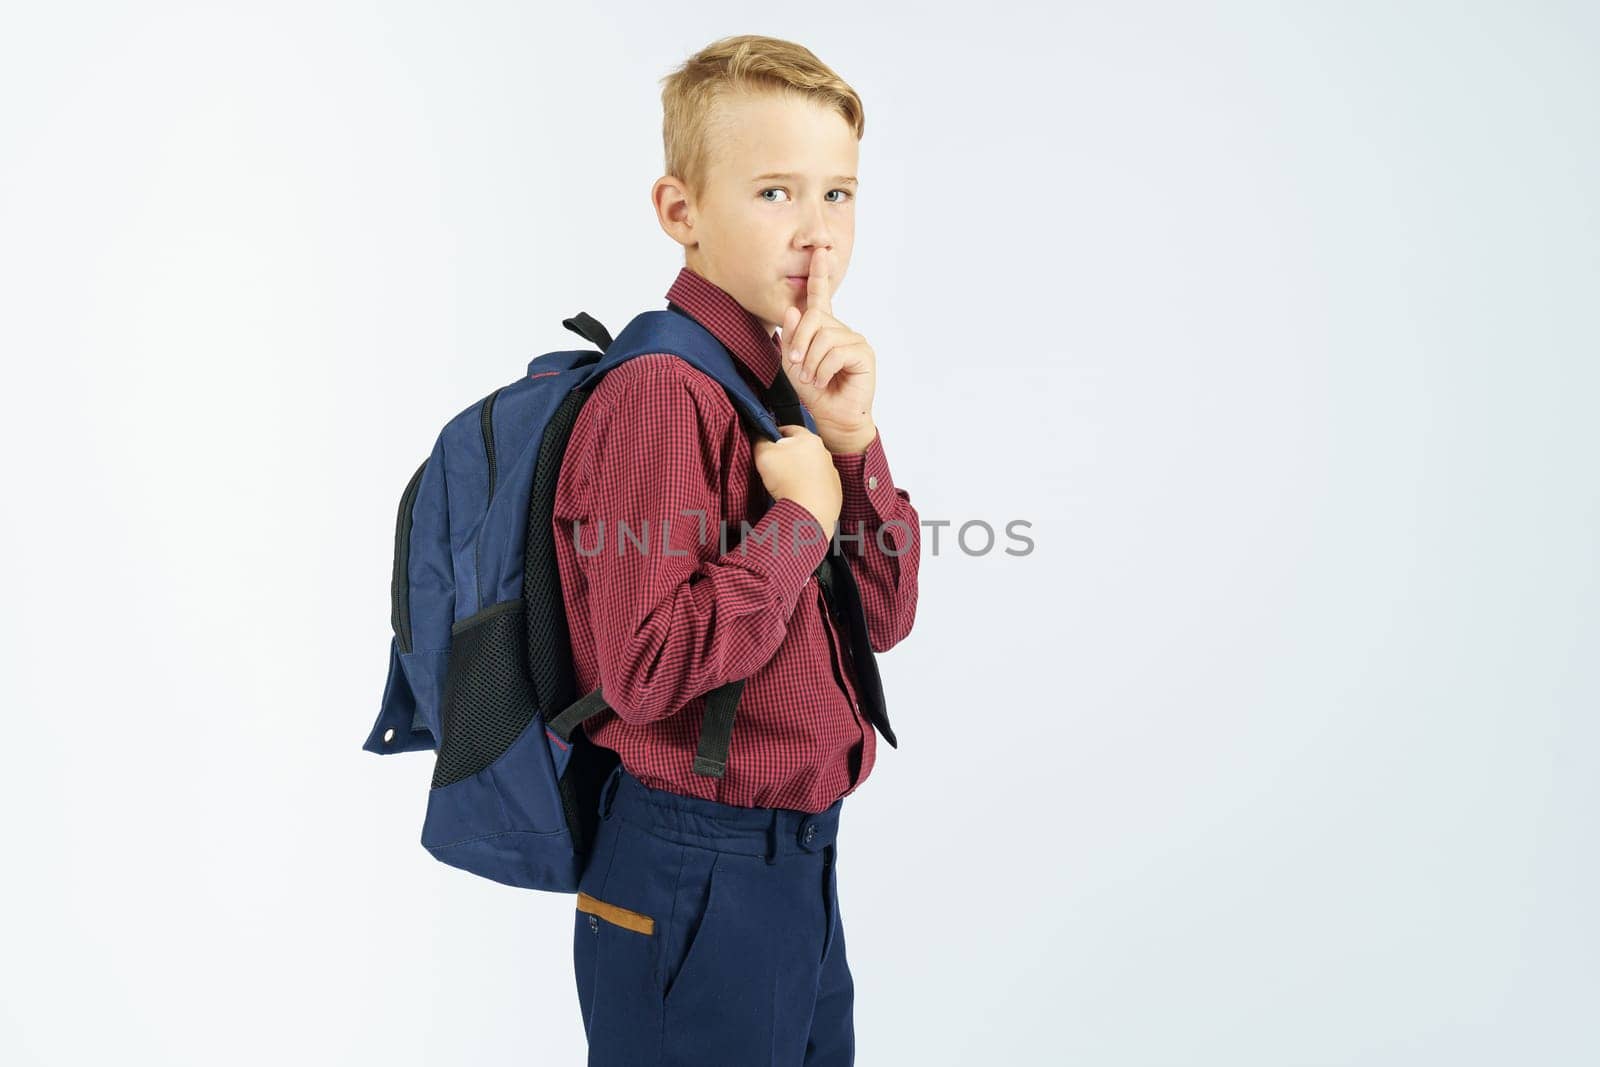 A schoolboy holds a school backpack and shows a gesture with his hand - be quiet. by Sd28DimoN_1976